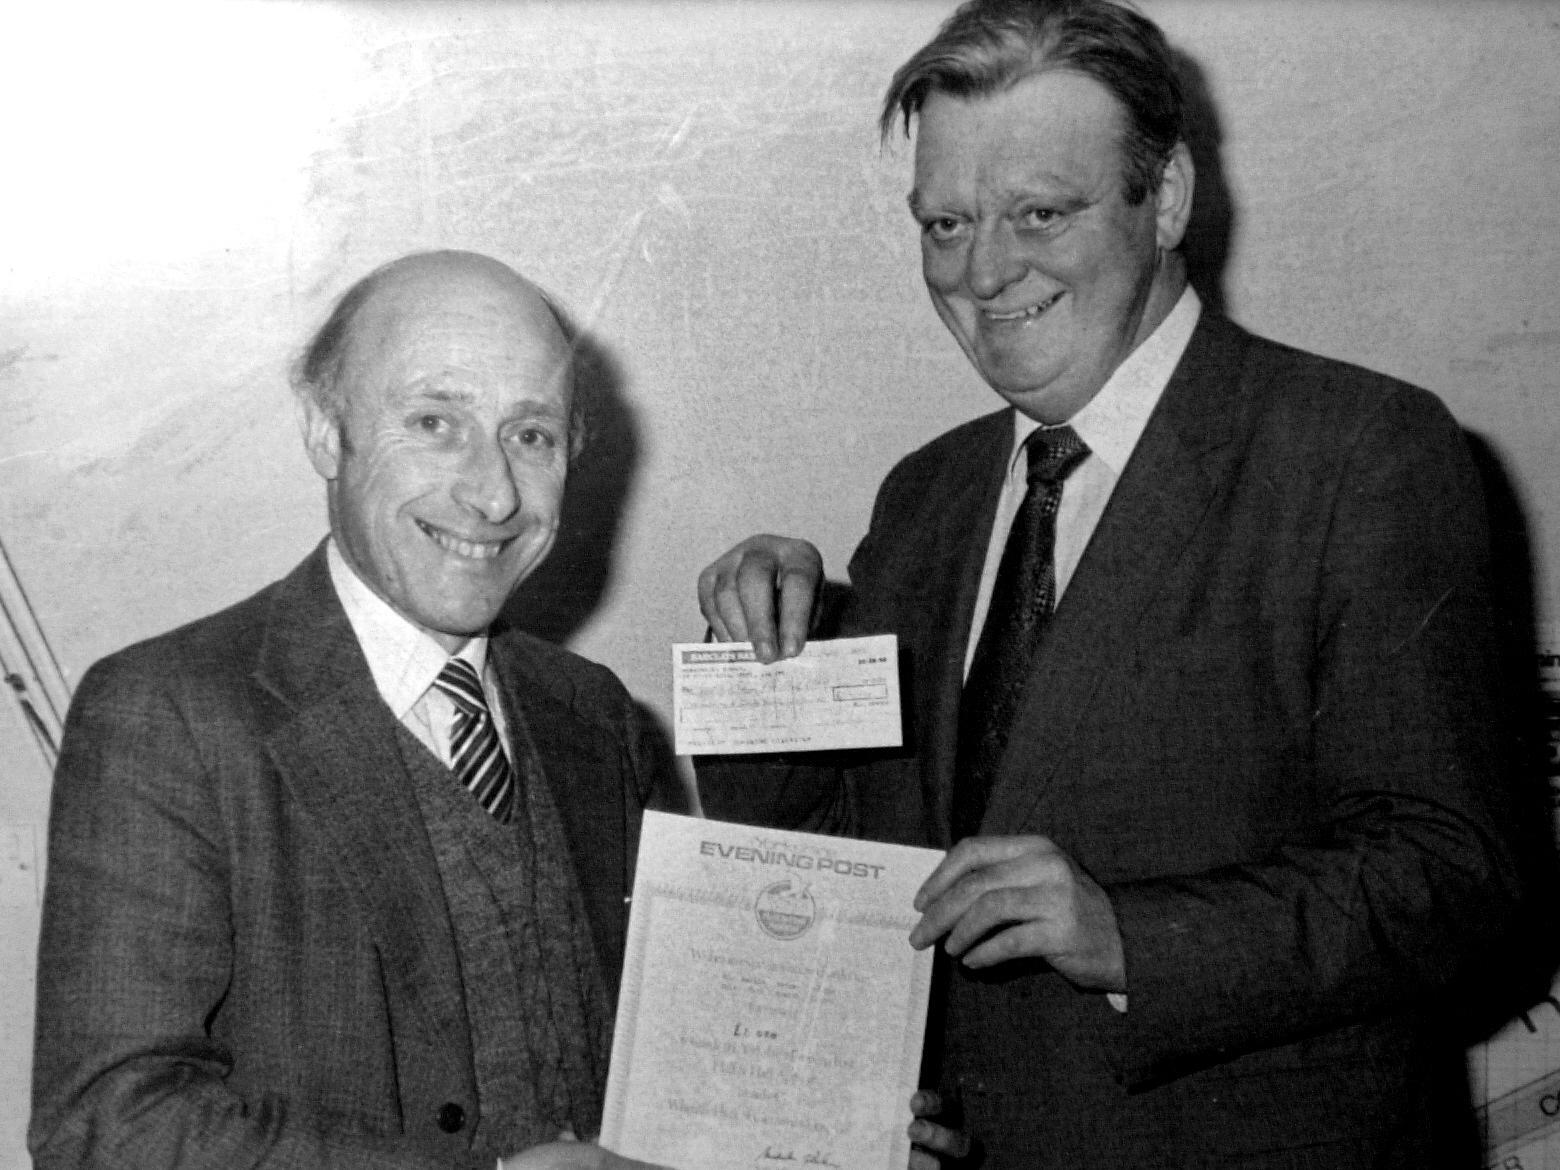 Dr Martin Berger with the then YEP editor Malcolm Barker  being presented a certificate for his efforts for the Half and Half through his two pictures of Adel Church.